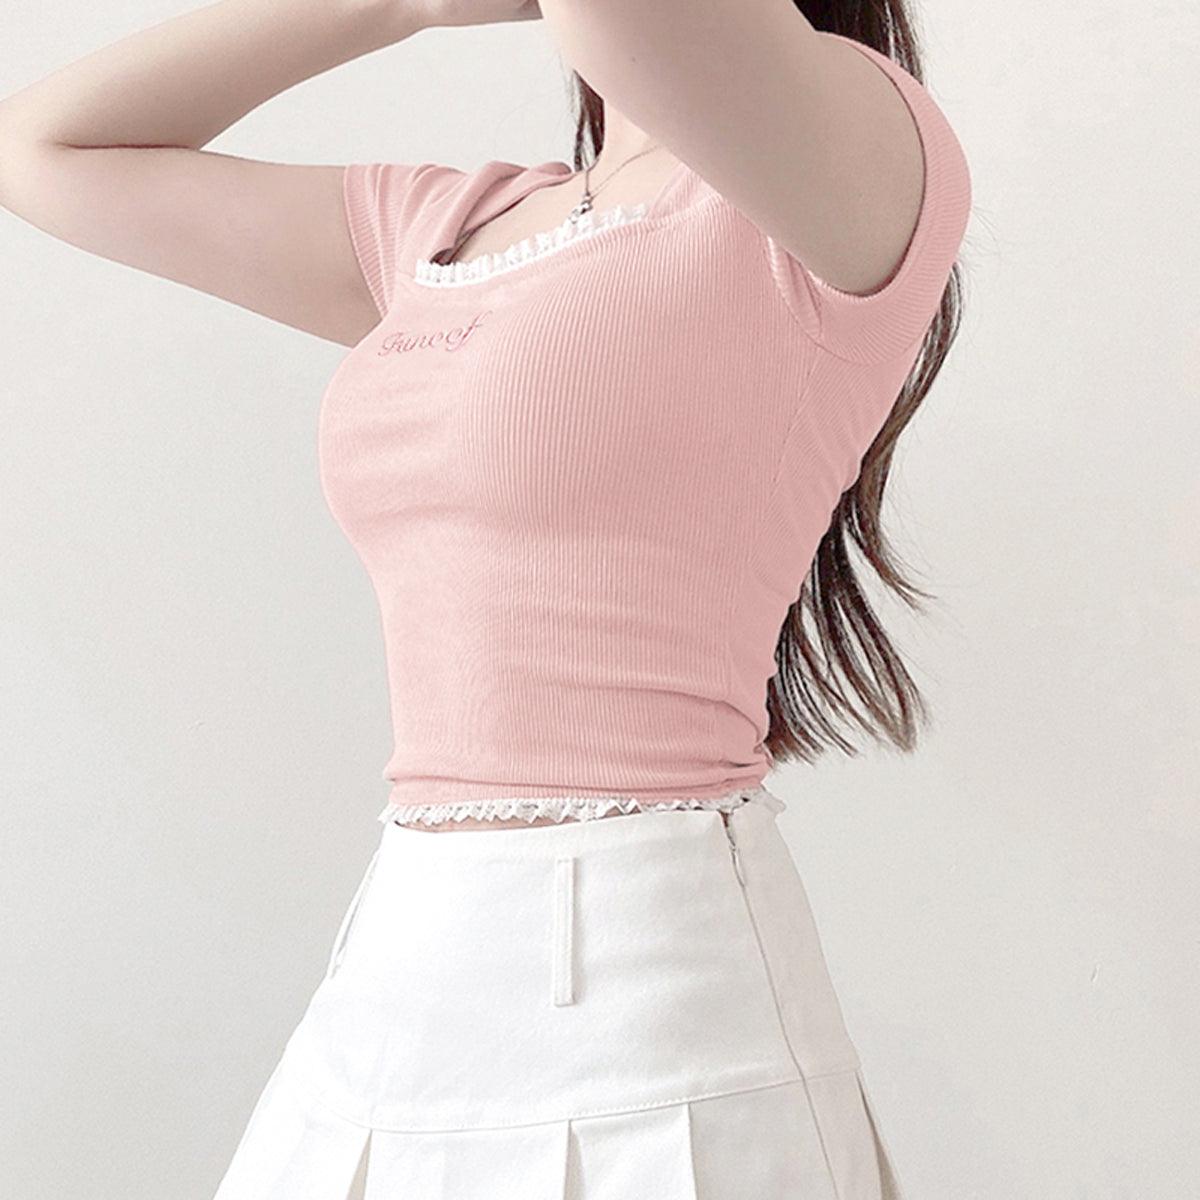 Pastel Pink Soft Girl Crop Top - Aesthetic Clothes Shop